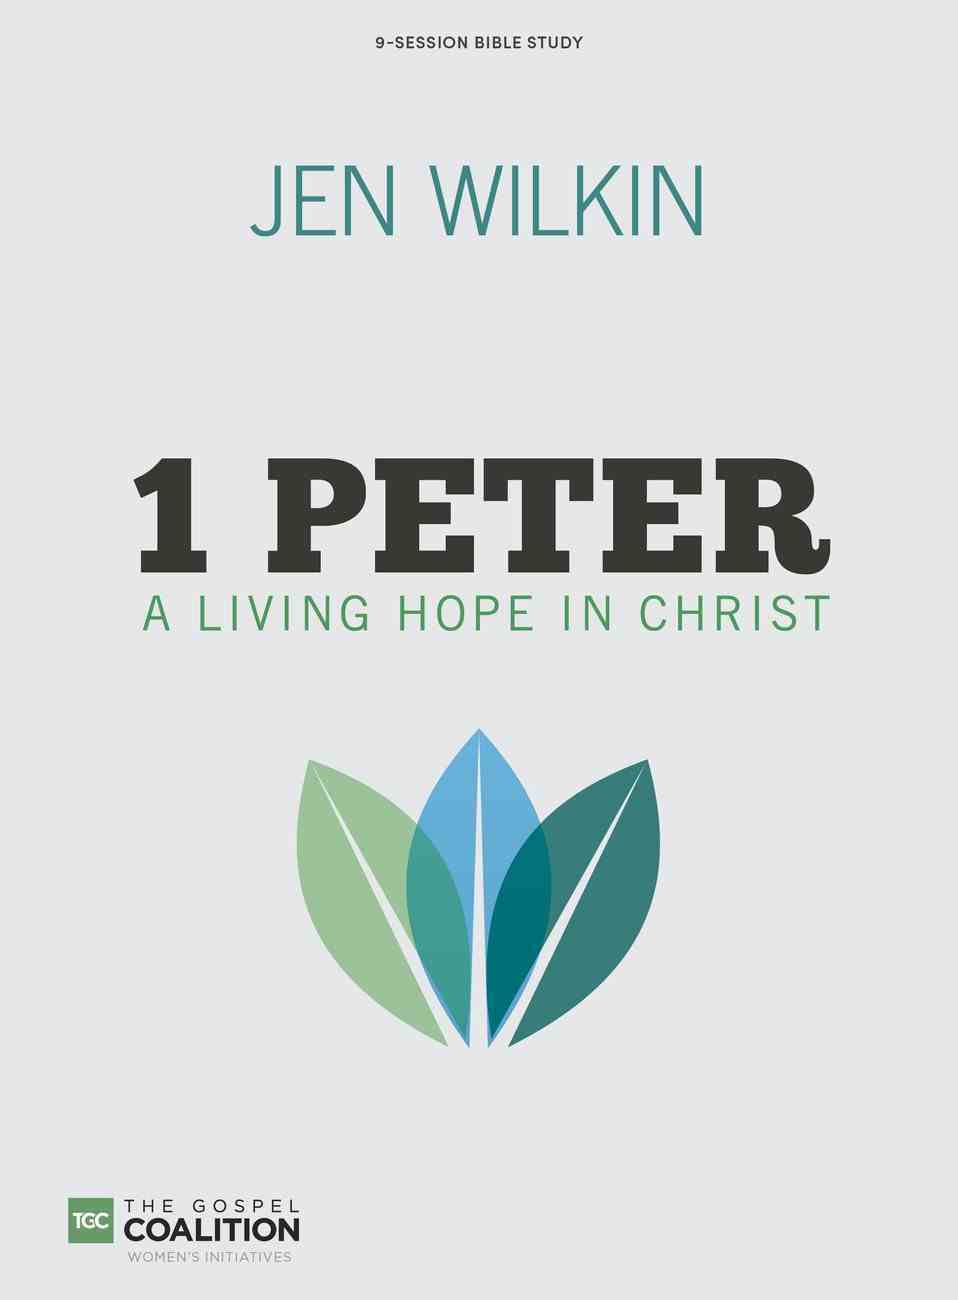 1 Peter: A Living Hope in Christ (Bible Study Book: 9-sessions Study With 8 Weeks Of Homework, Personal Study Segments, Verse-by-verse Approach To Complete A Book Study) Paperback